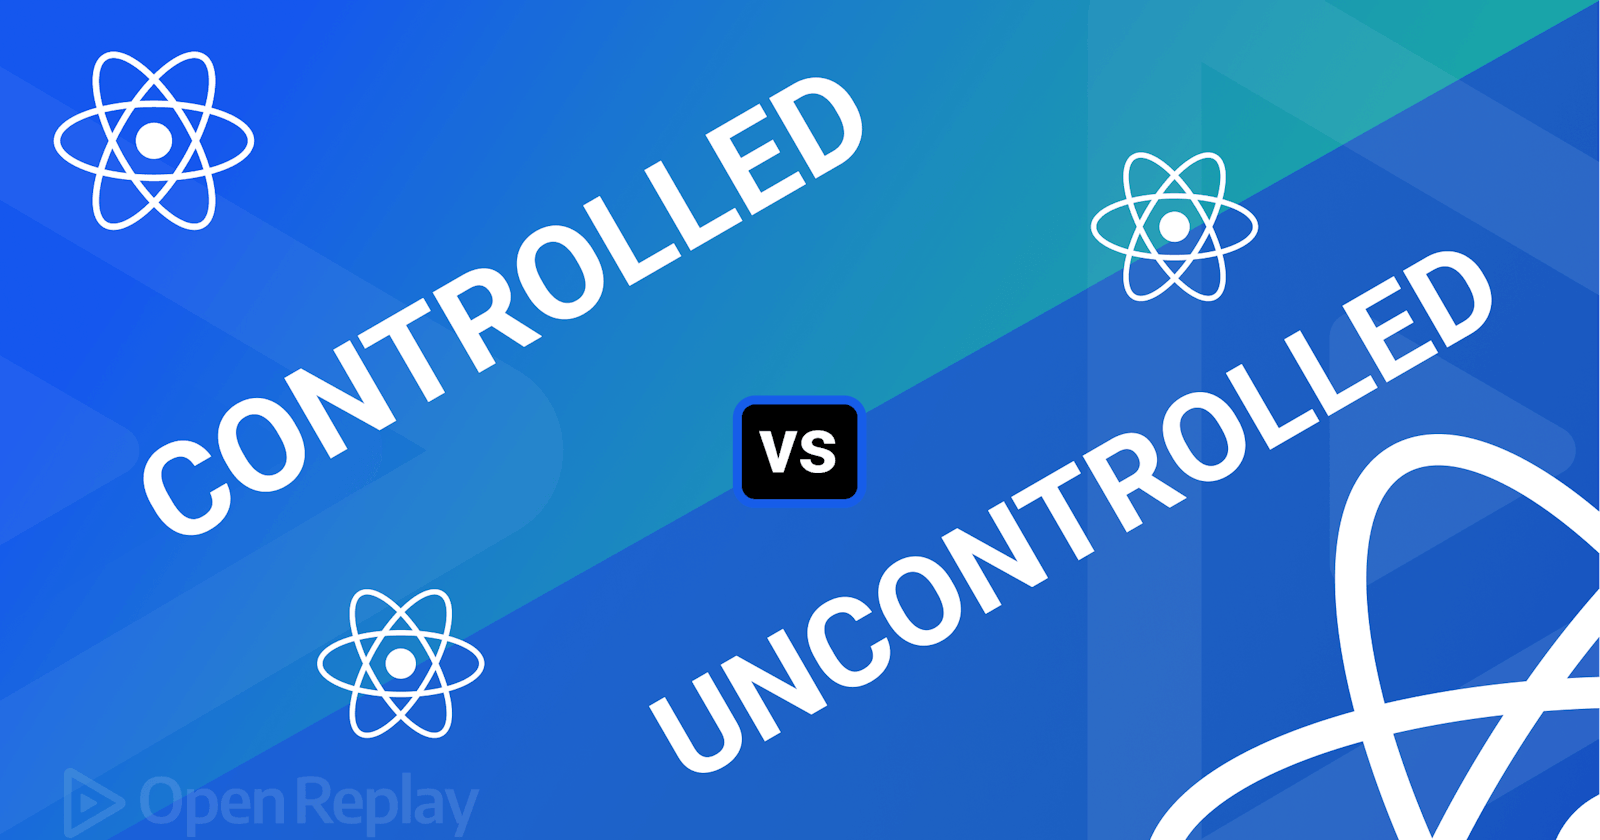 Understanding Controlled and Uncontrolled components in React